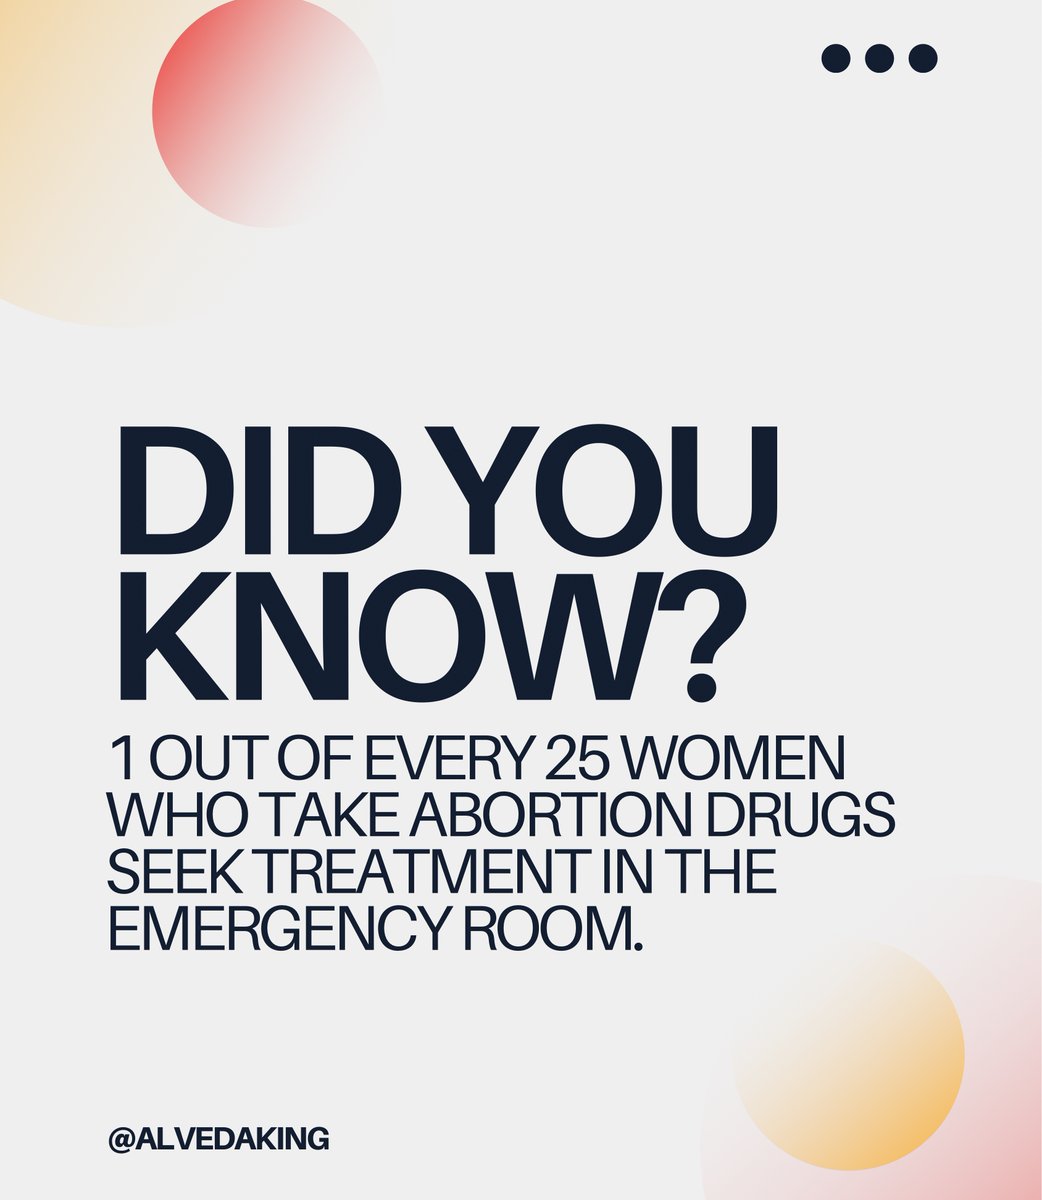 Mothers have the right to know the dangers of Mifepristone. #WomensHealthMatters